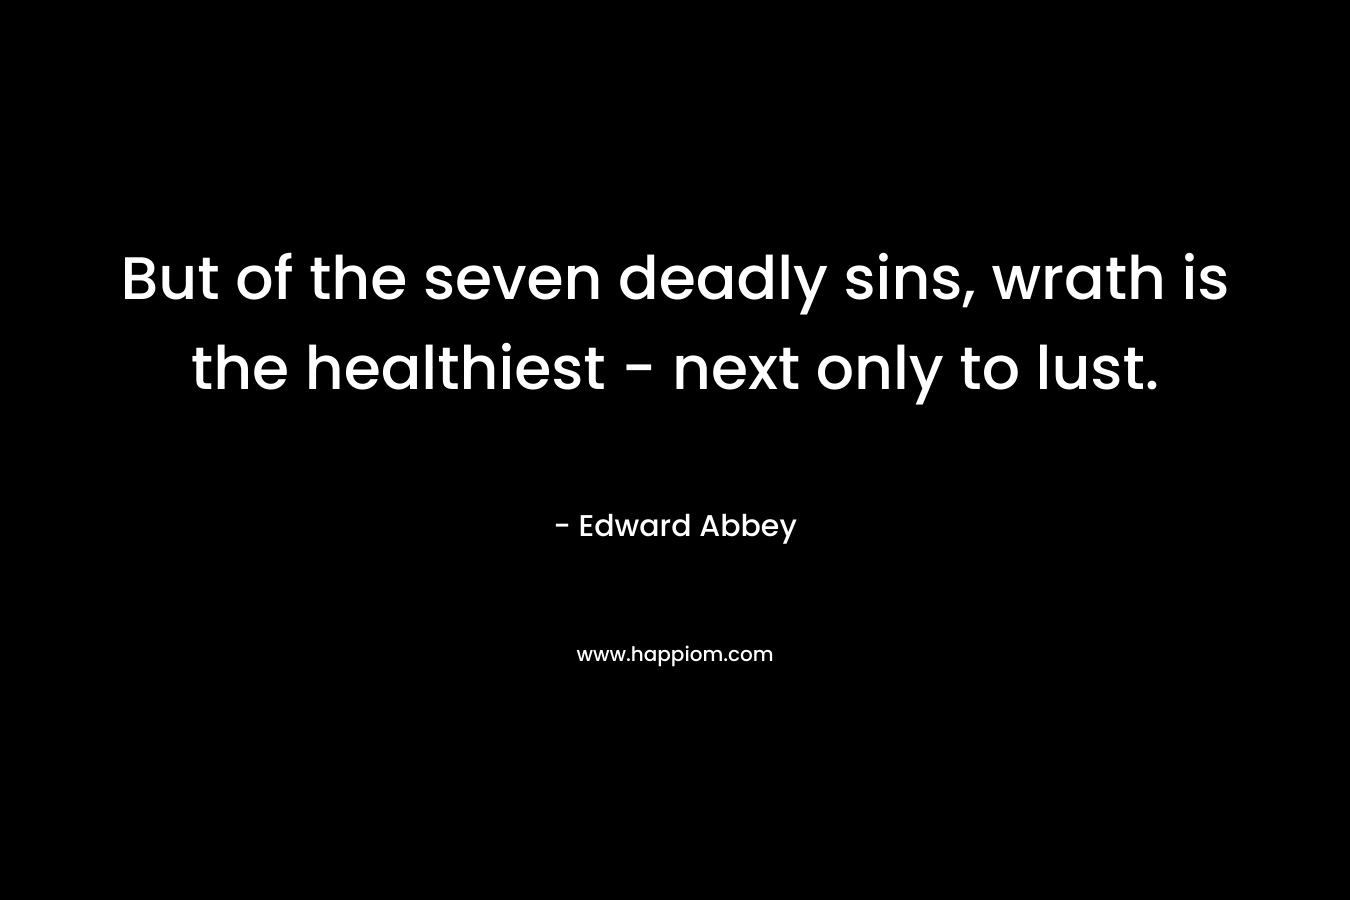 But of the seven deadly sins, wrath is the healthiest – next only to lust. – Edward Abbey